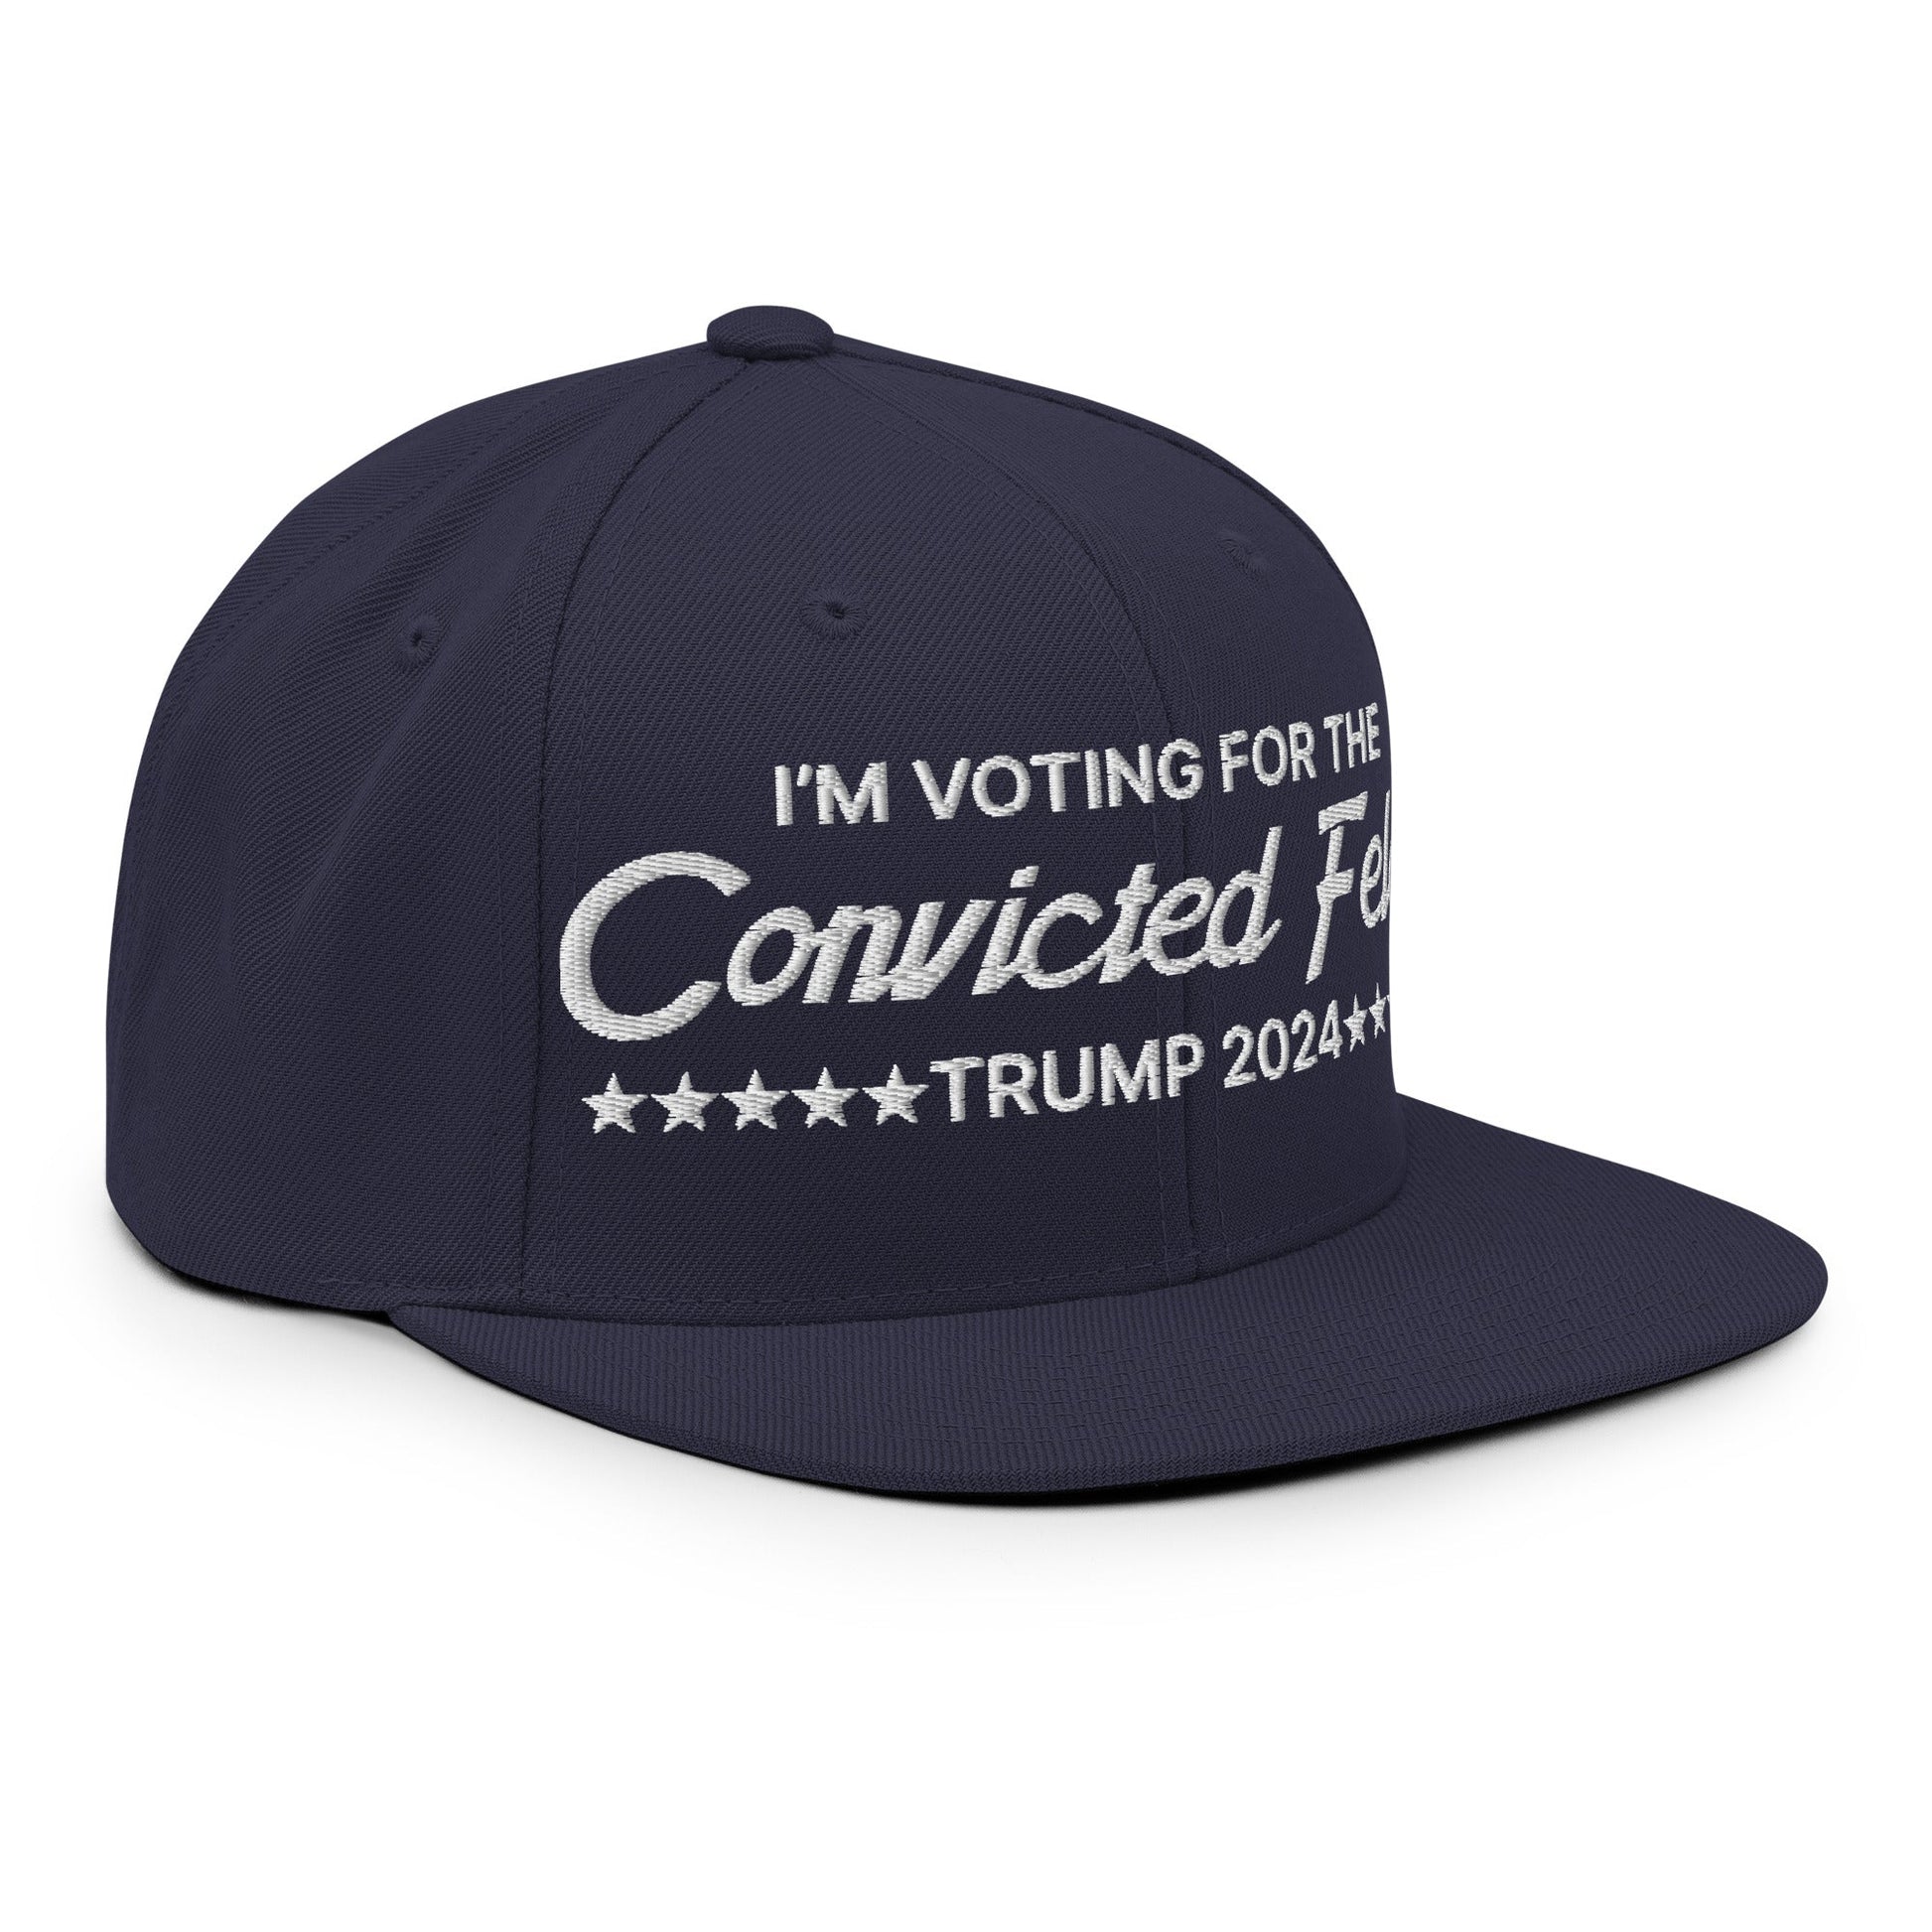 I'm Voting For The Convicted Felon Trump 2024 Snapback Hat Navy